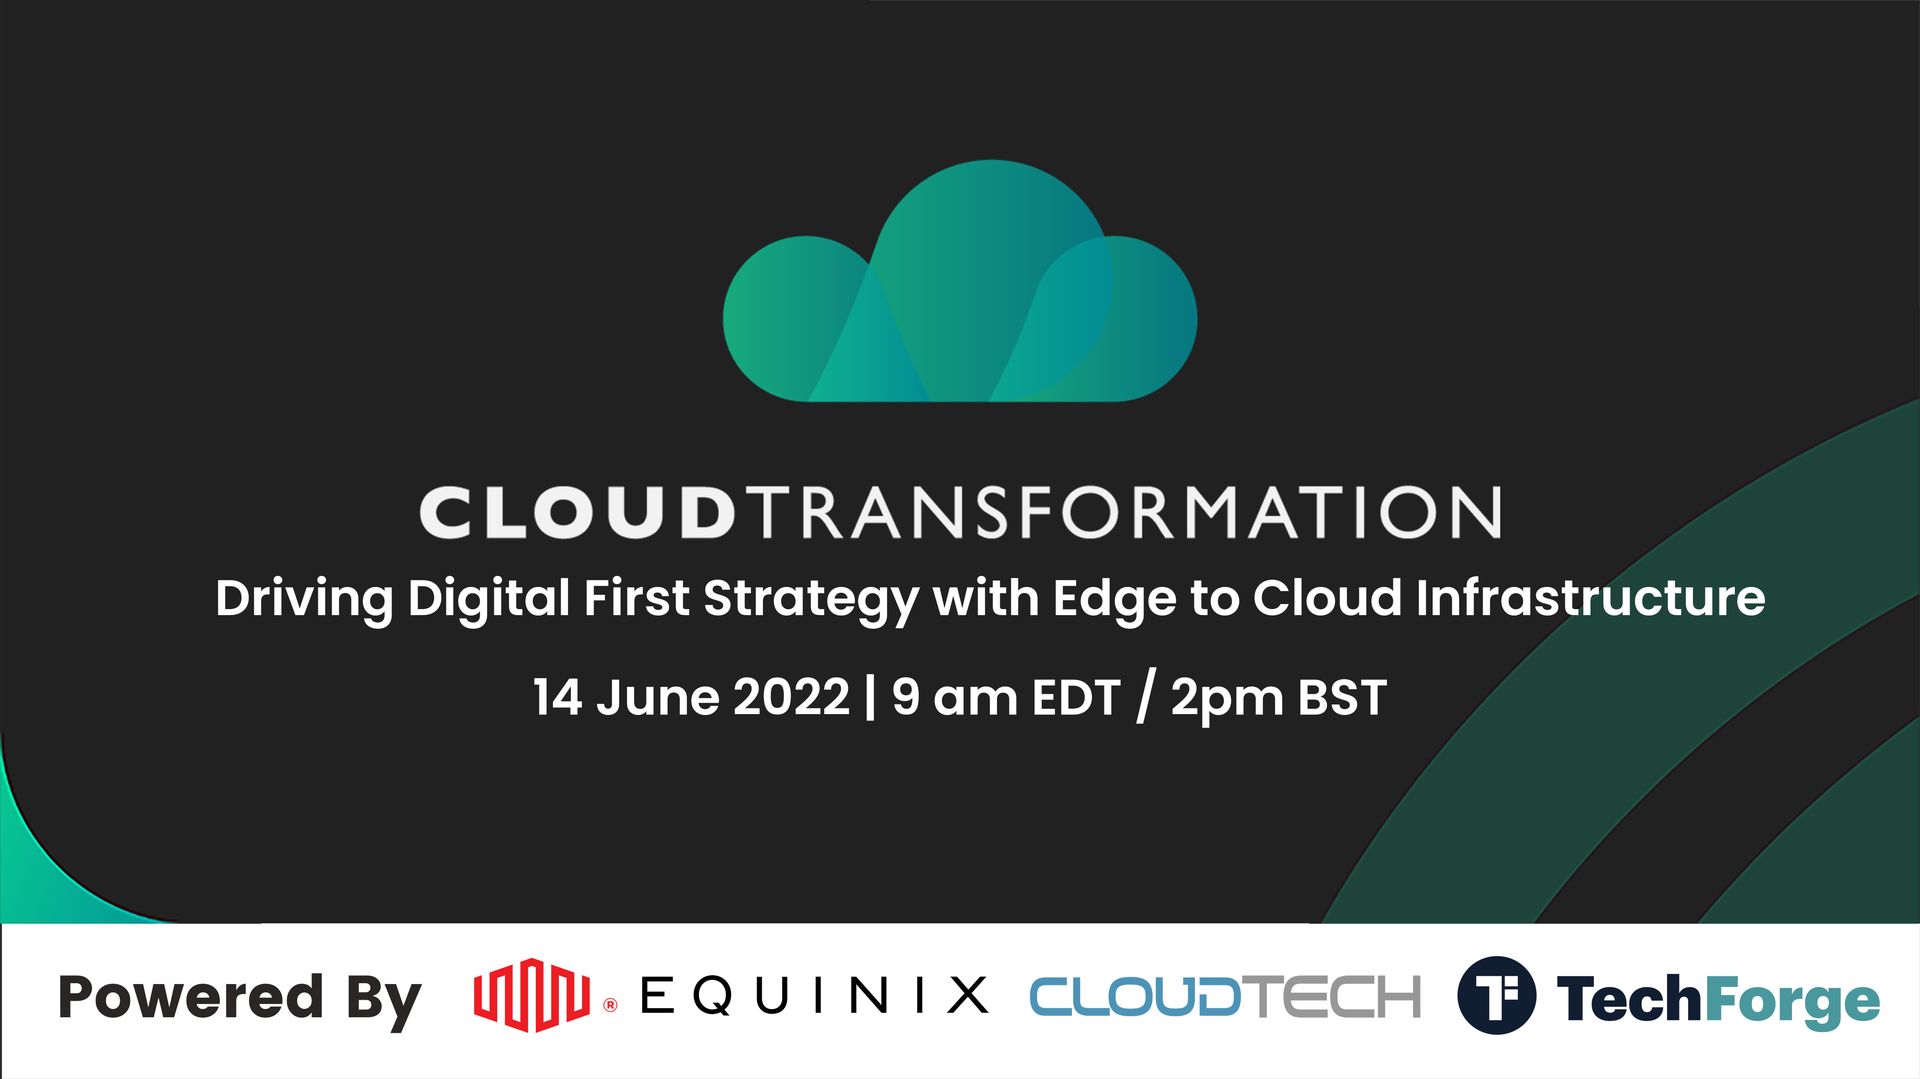 Cloud Transformation Conference